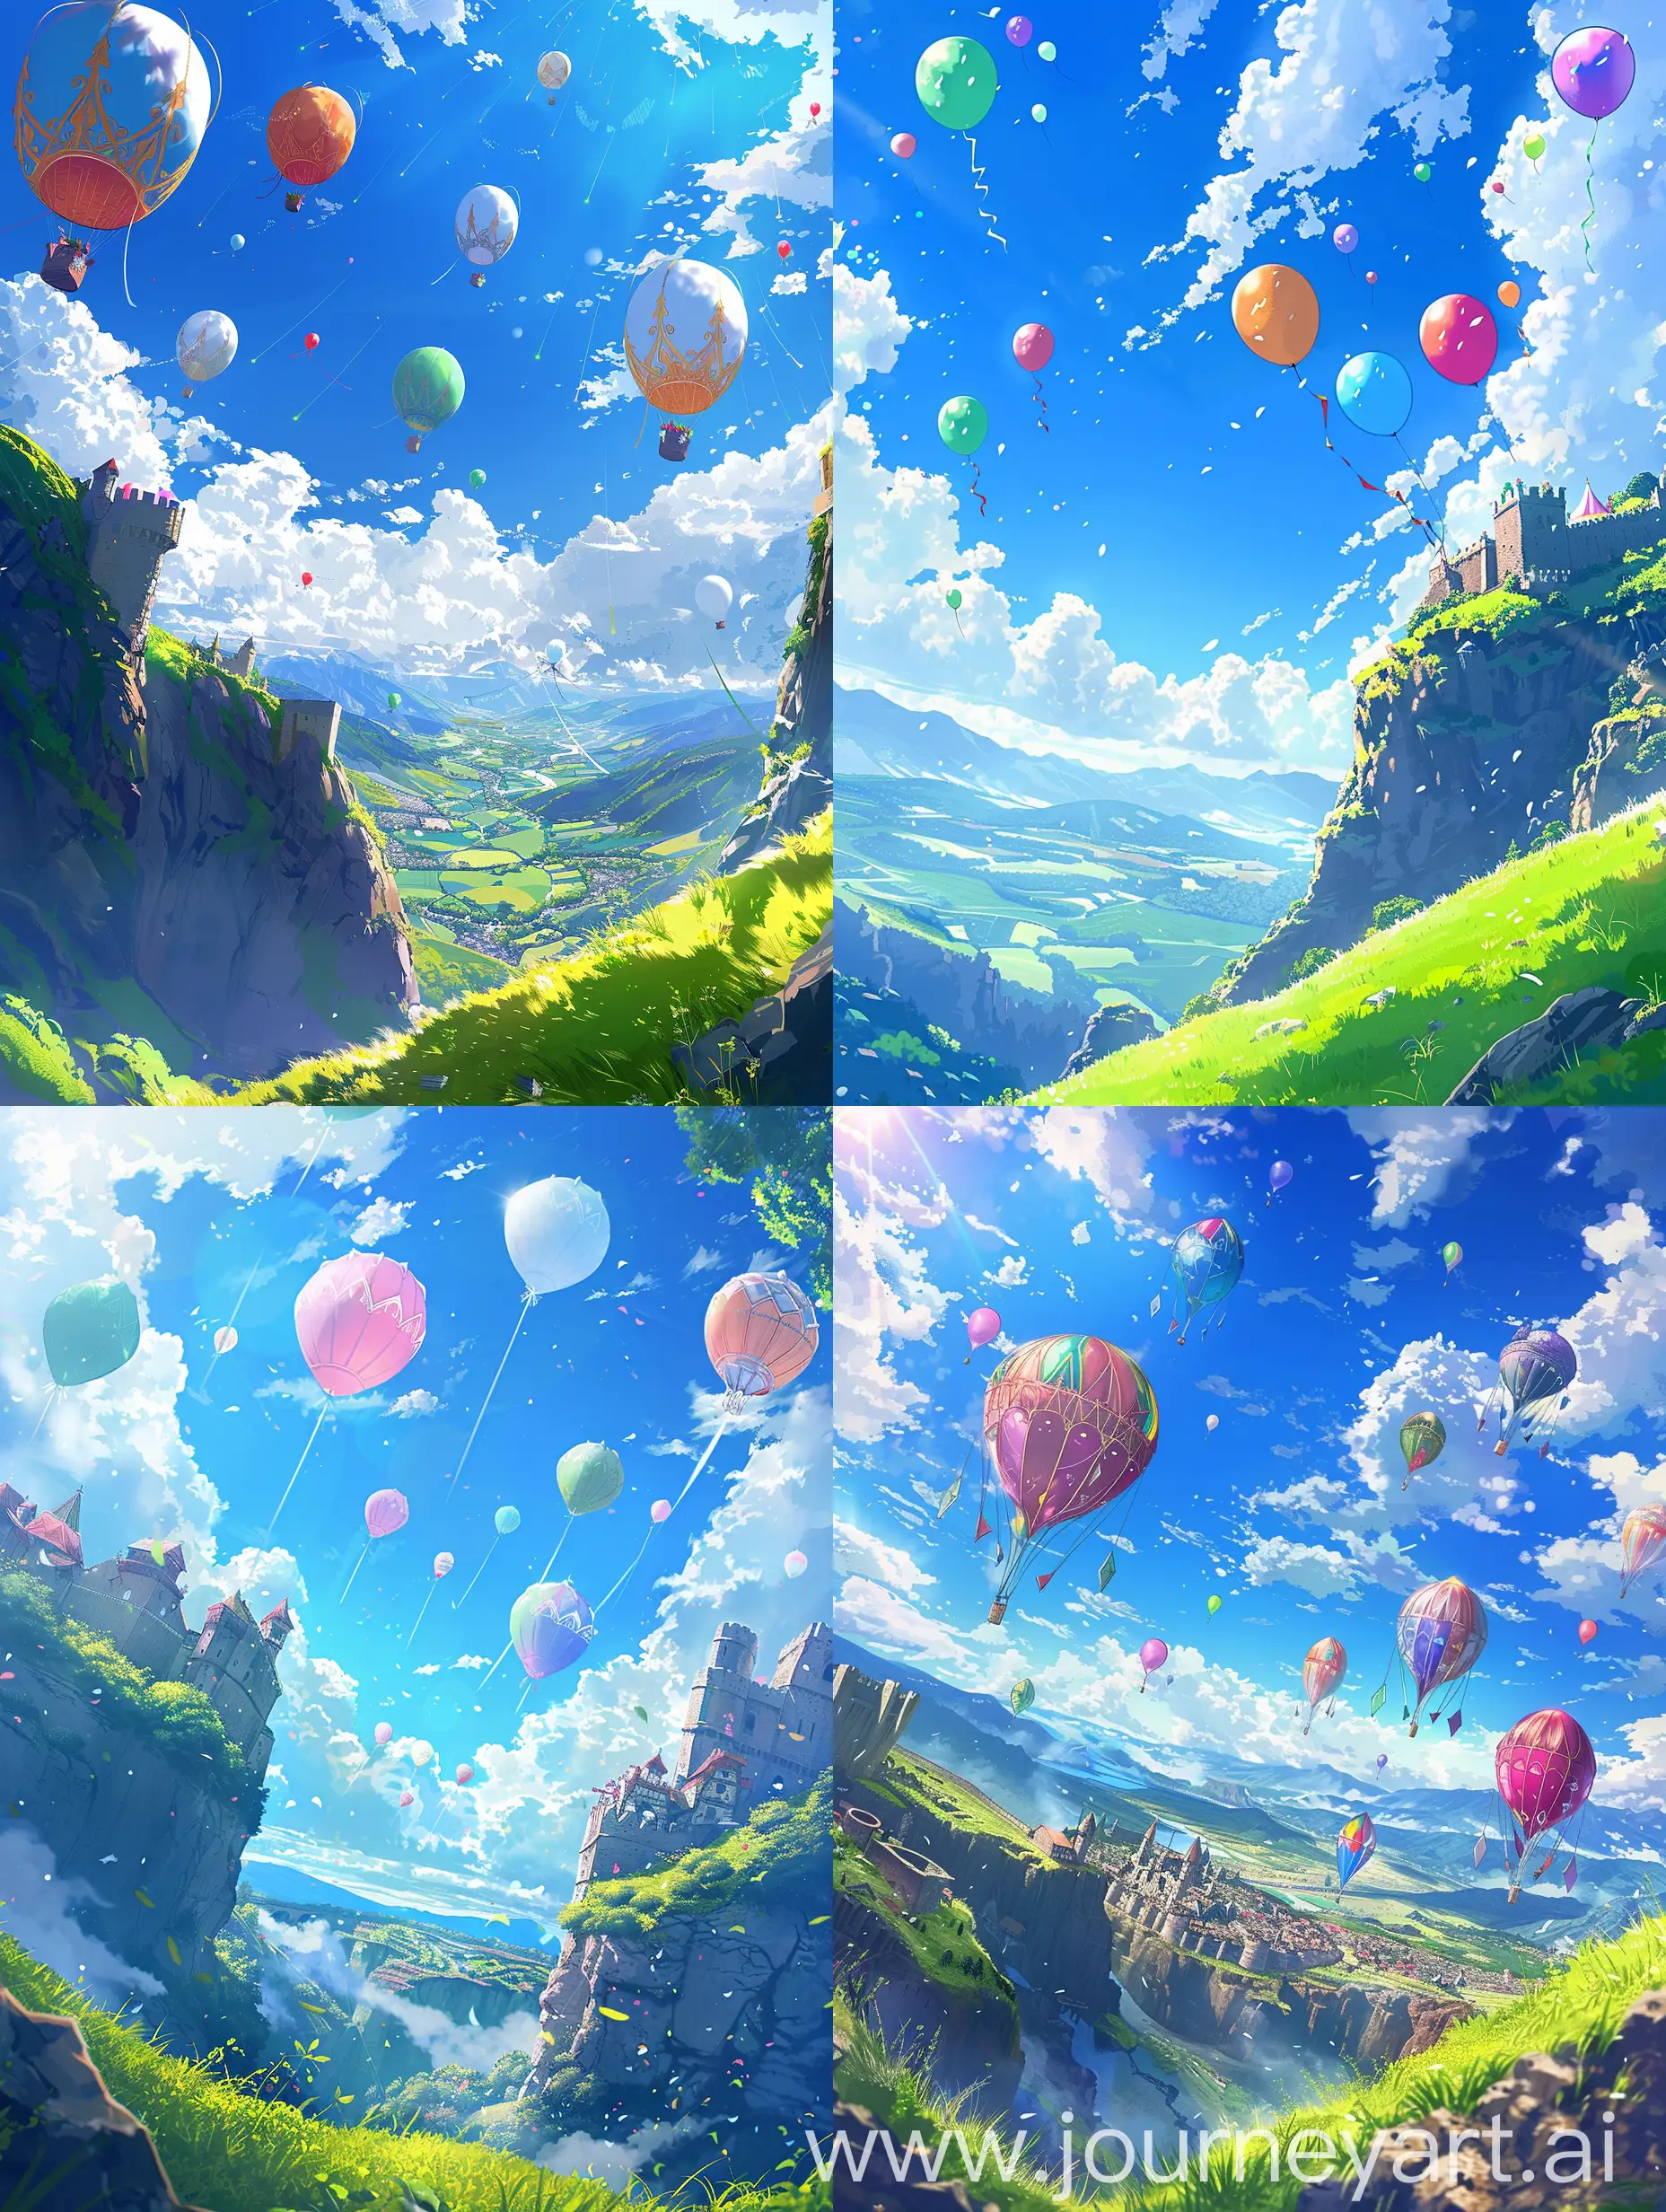 Joyful-Medieval-Kingdom-Celebration-with-Colorful-Balloons-in-Anime-Style